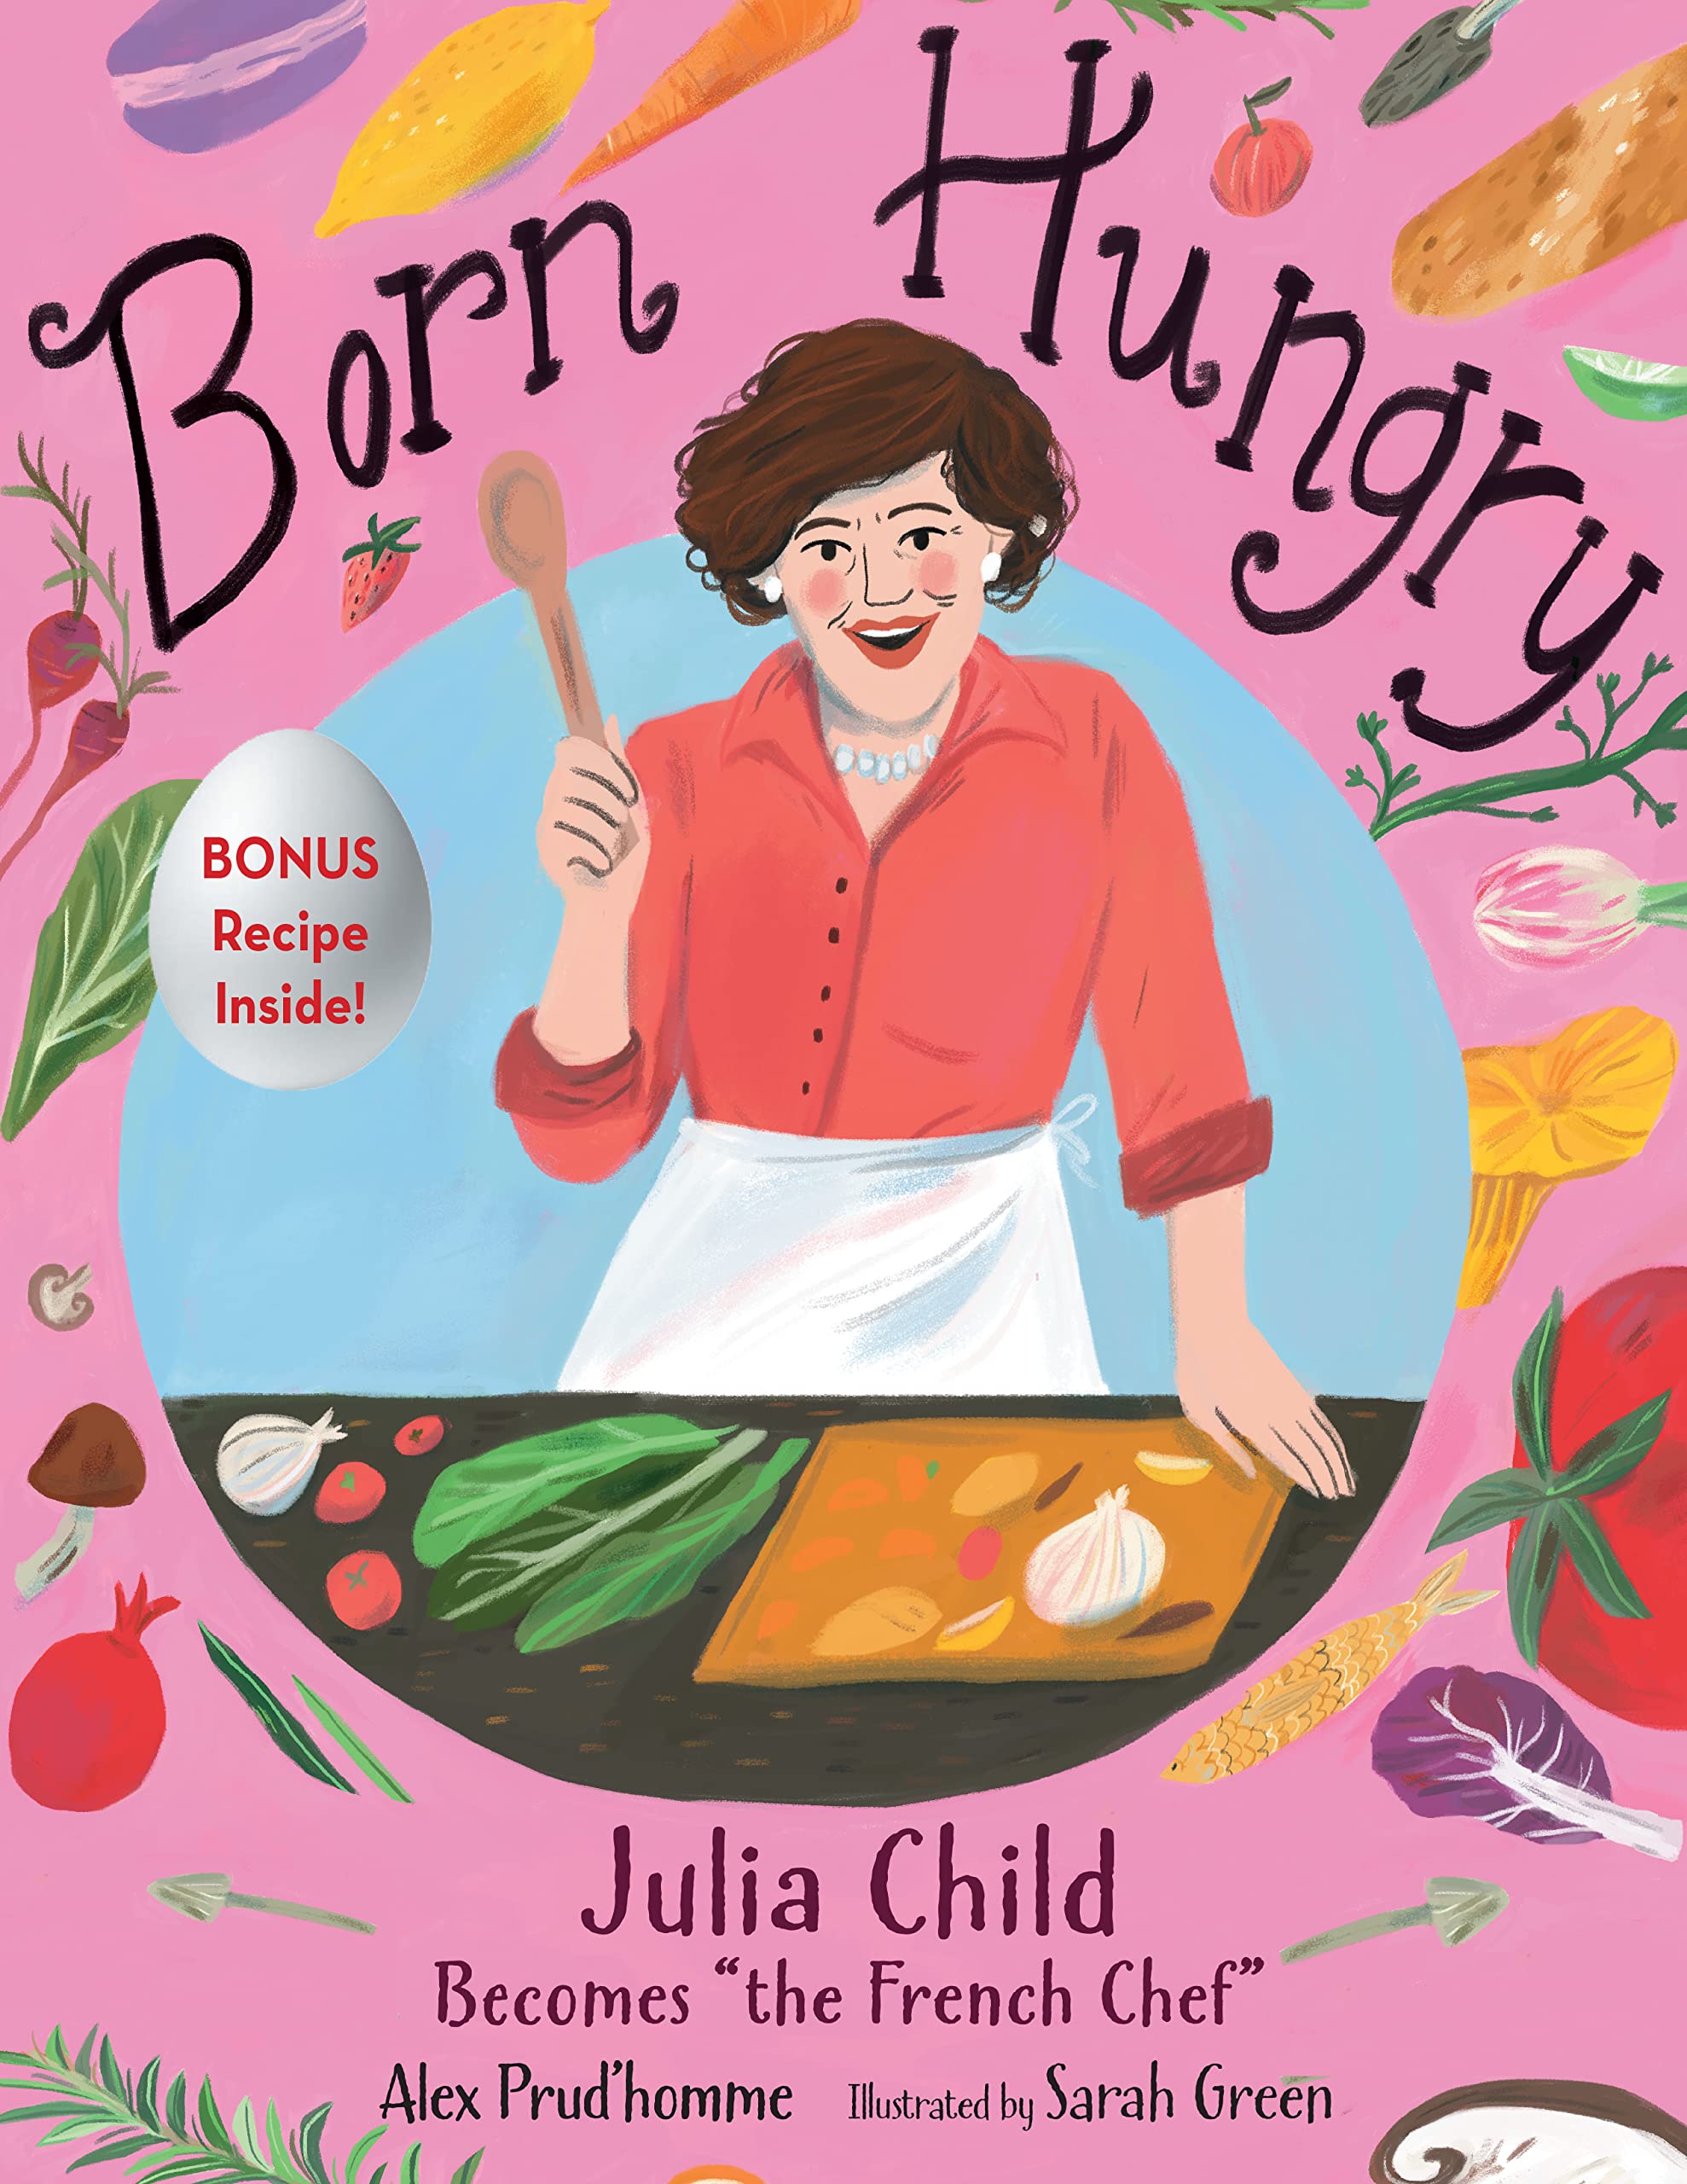 Born Hungry: Julia Child Becomes "the French Chef" (Alex Prud'homme, Sarah Green)